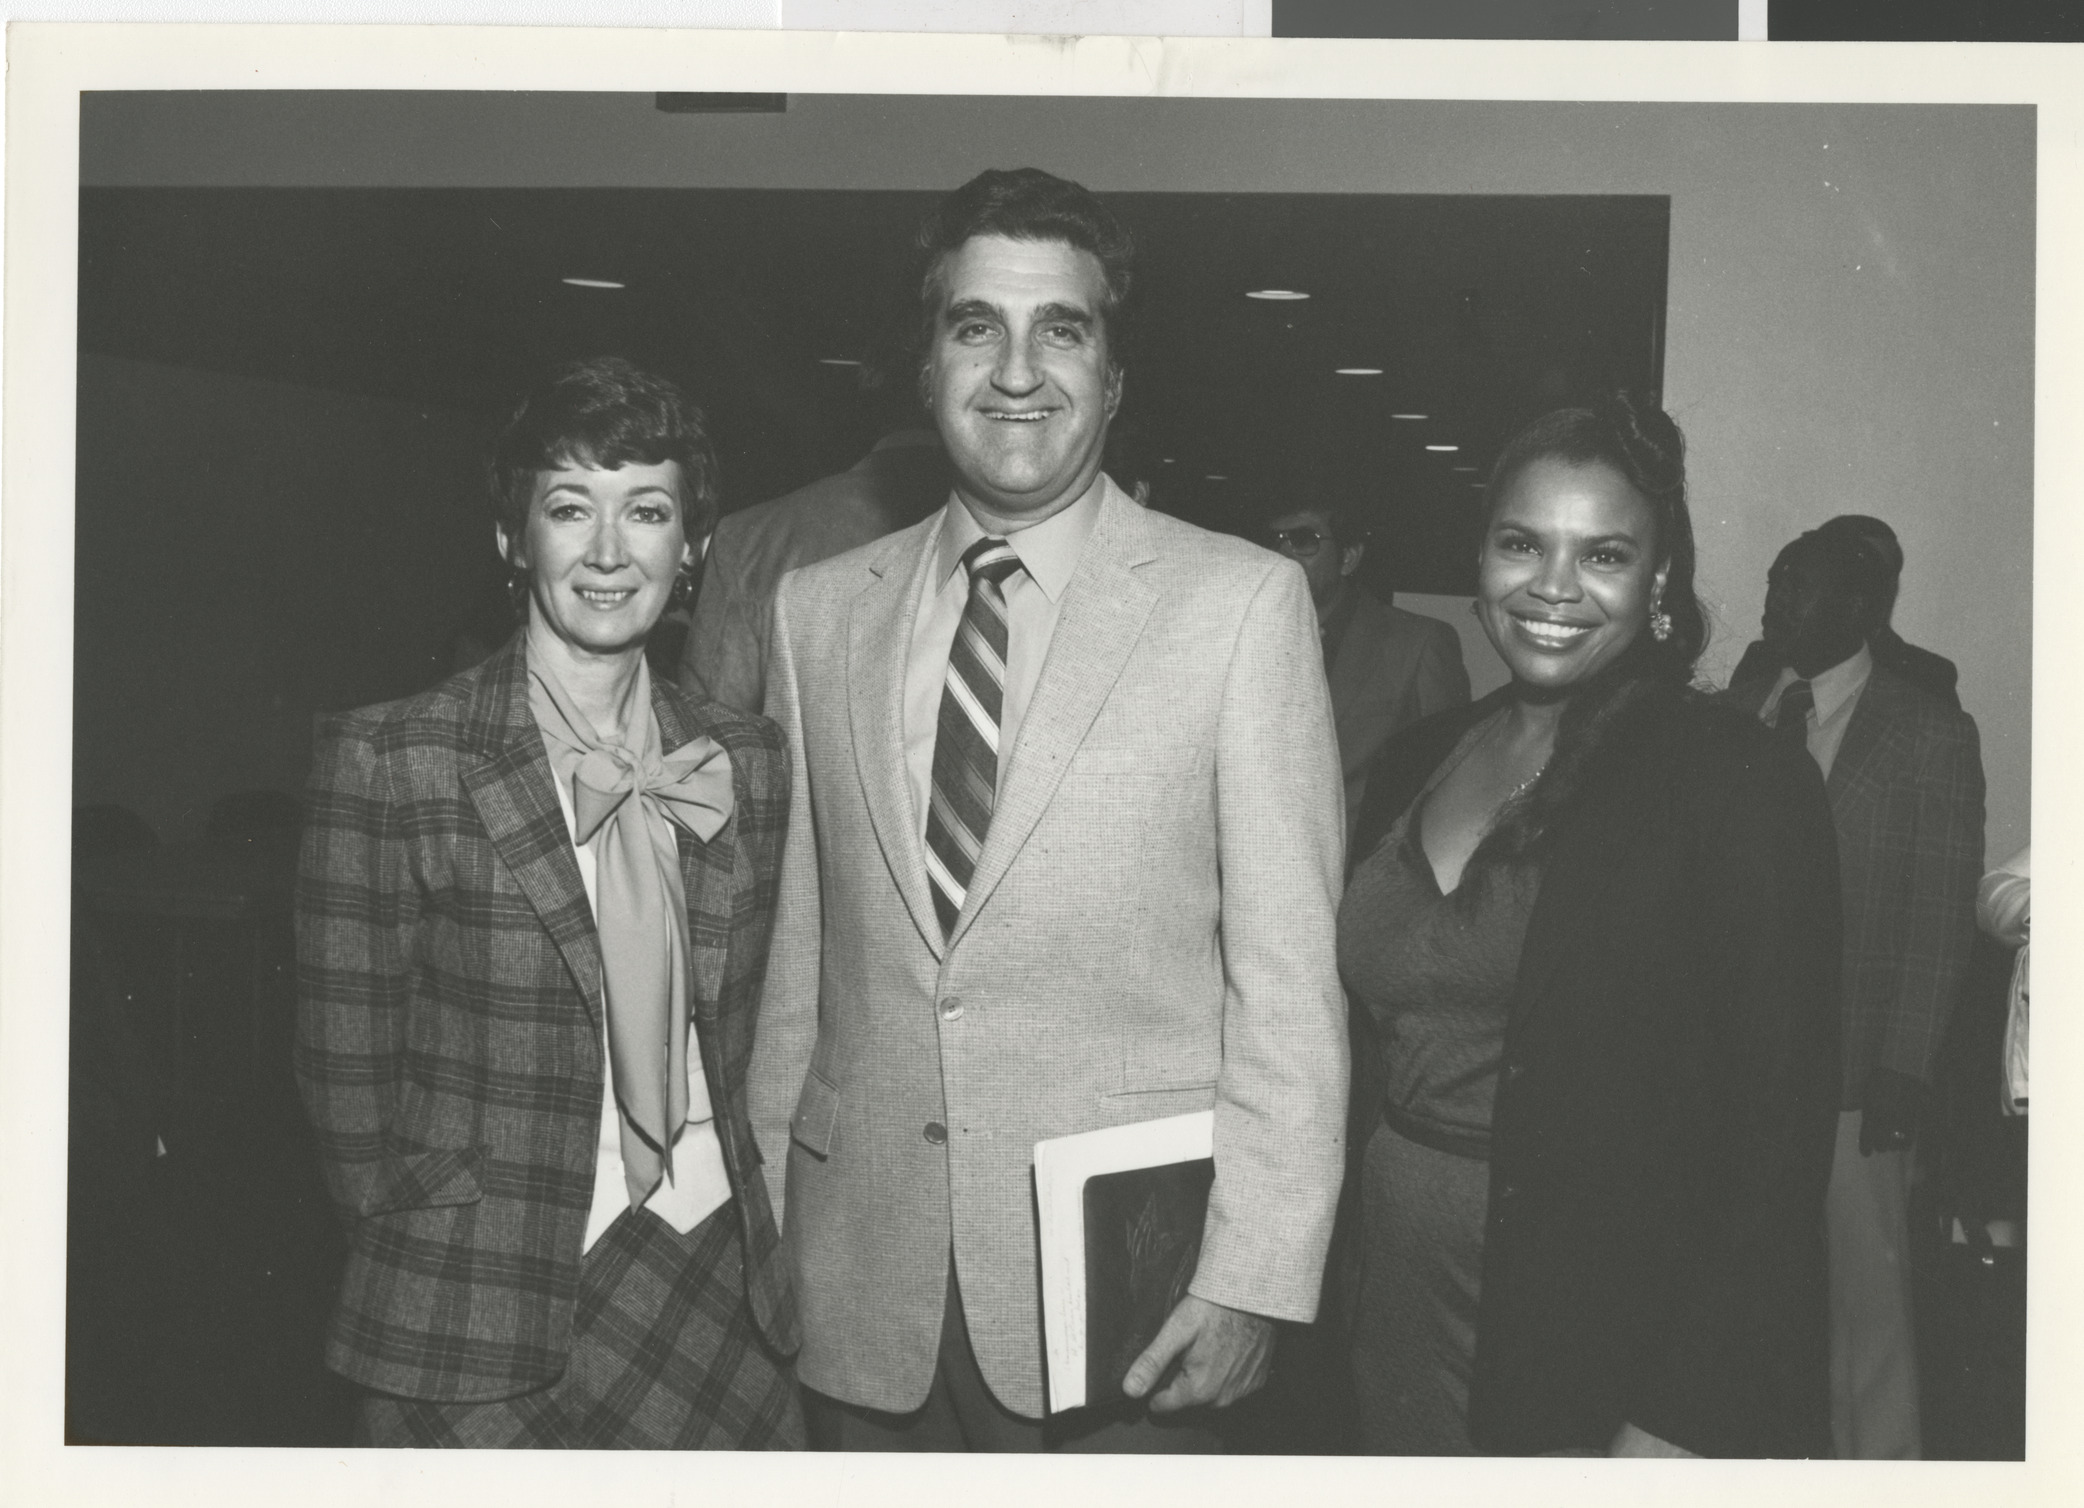 Photograph of Sandy Baxter, Ron Lurie and Verdia Turner